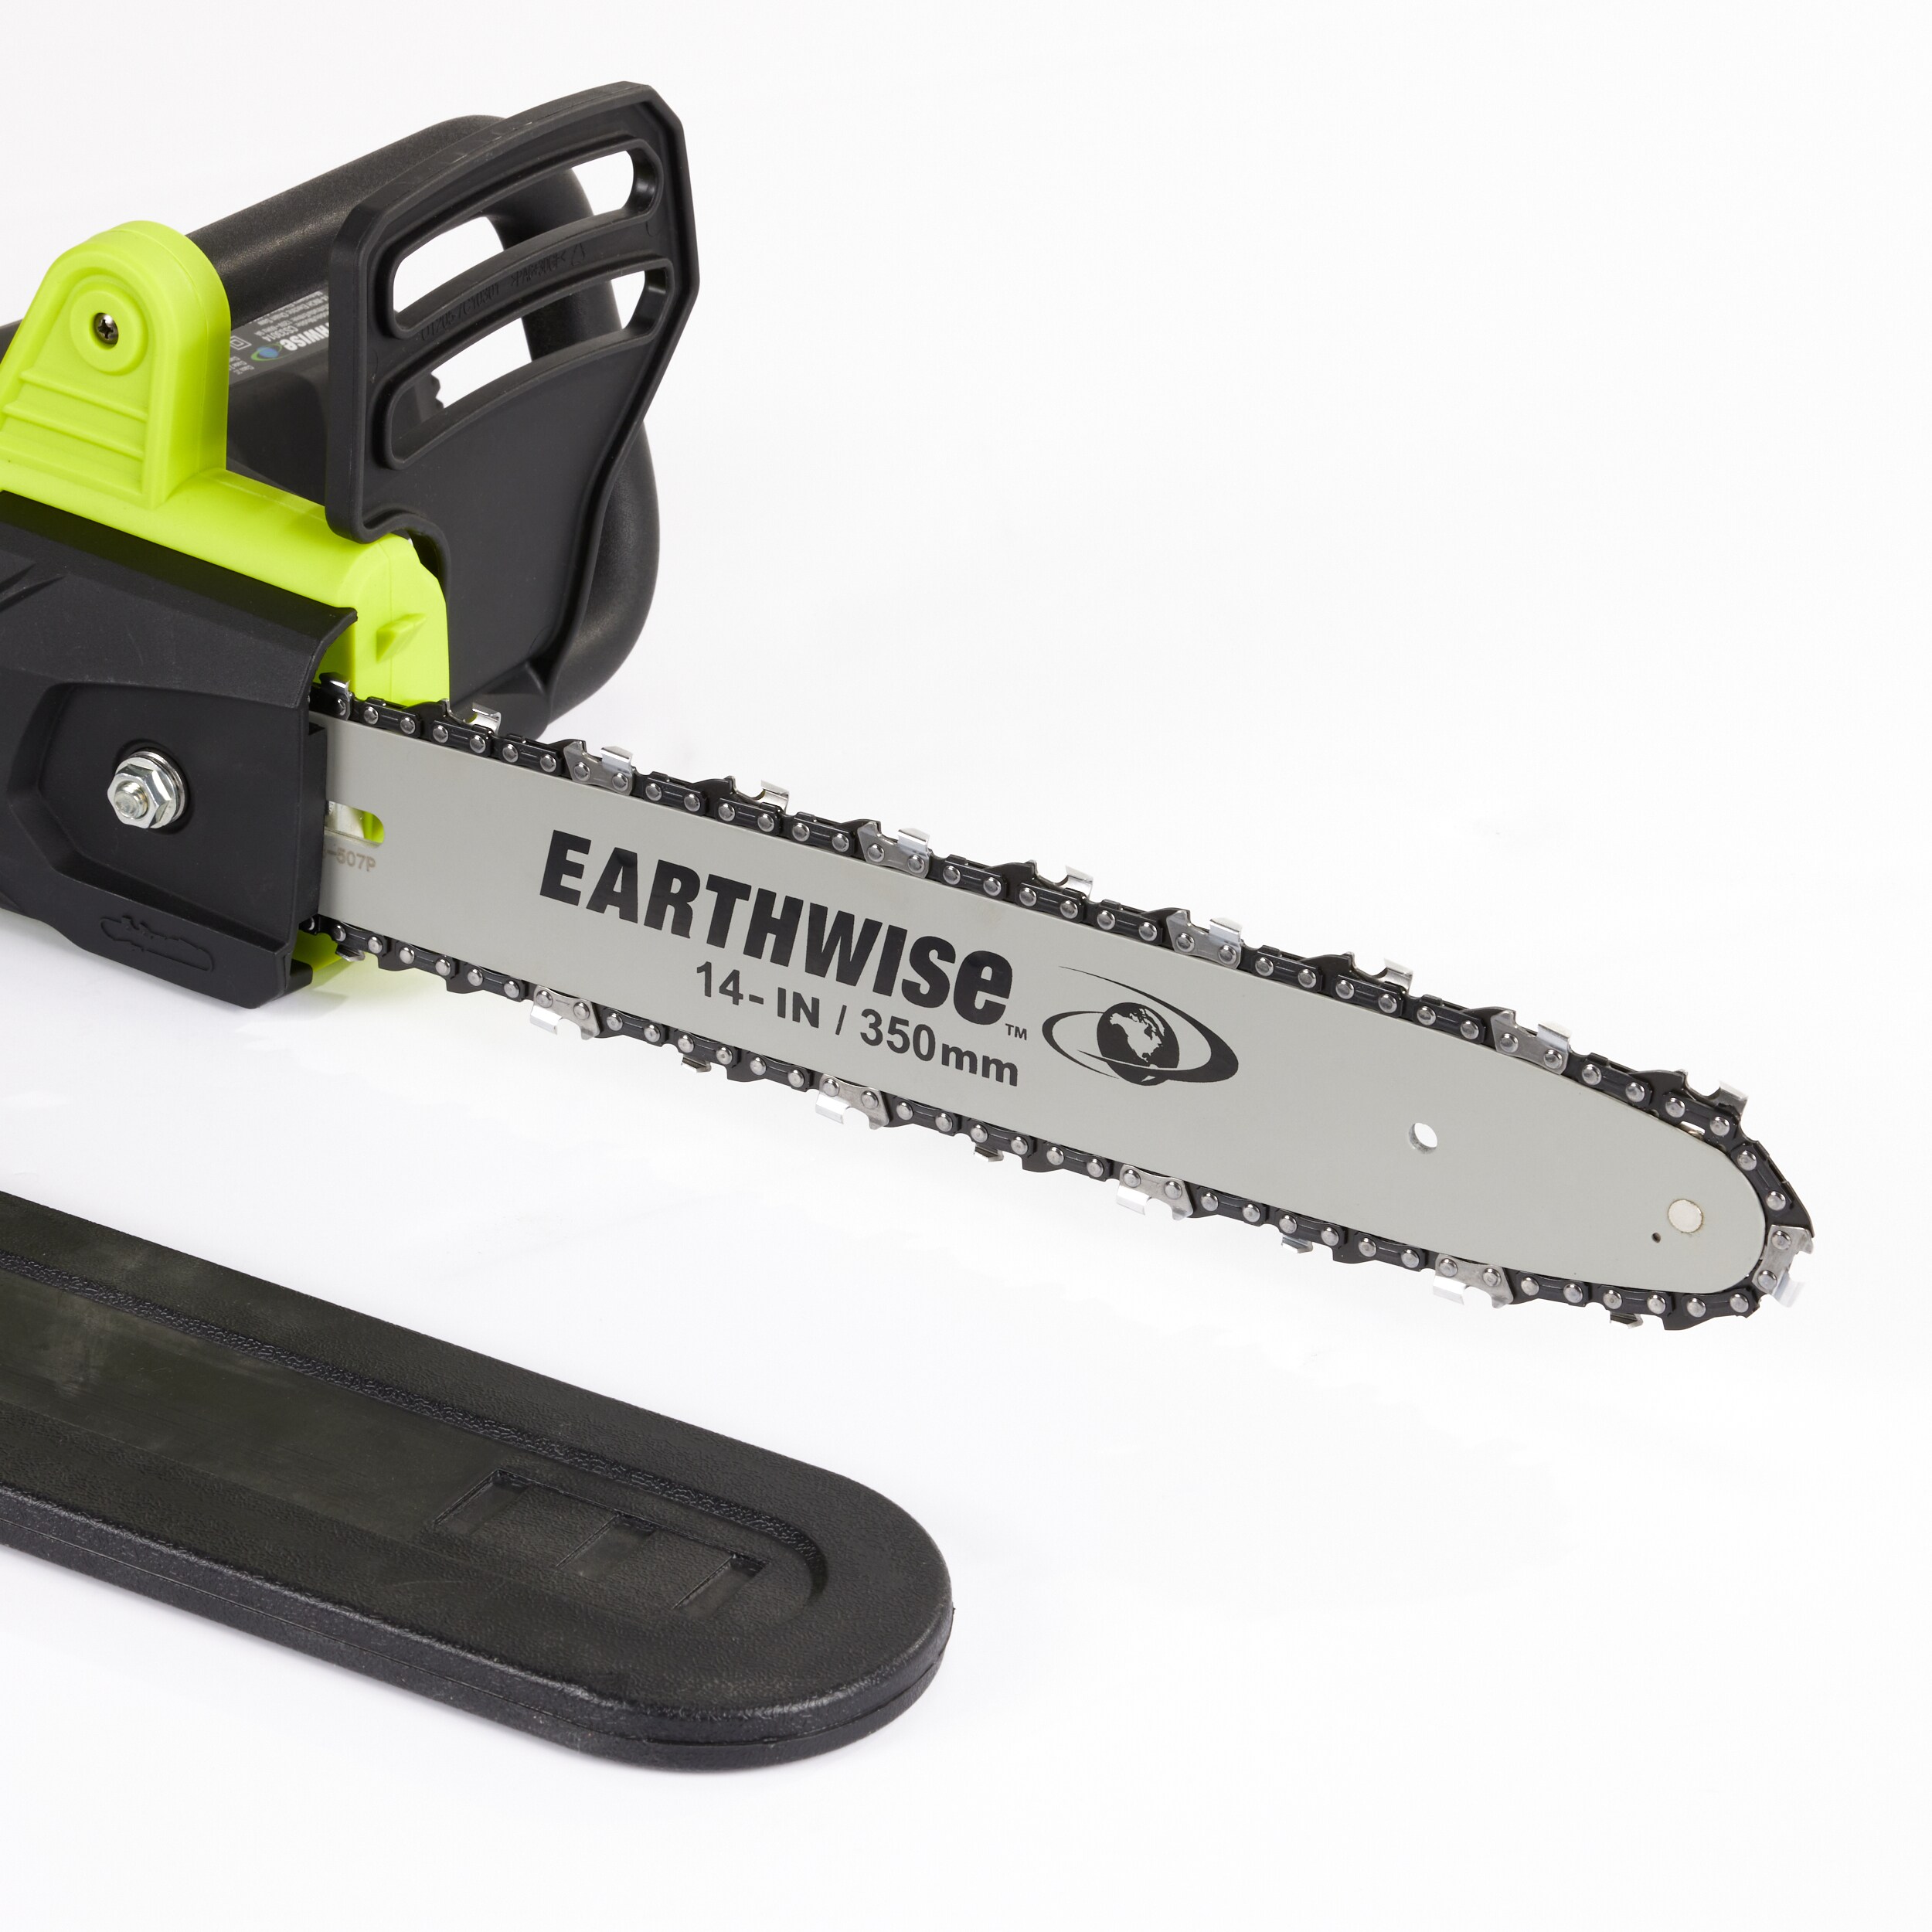 9 Things You Should Never Do to Your Chain Saw